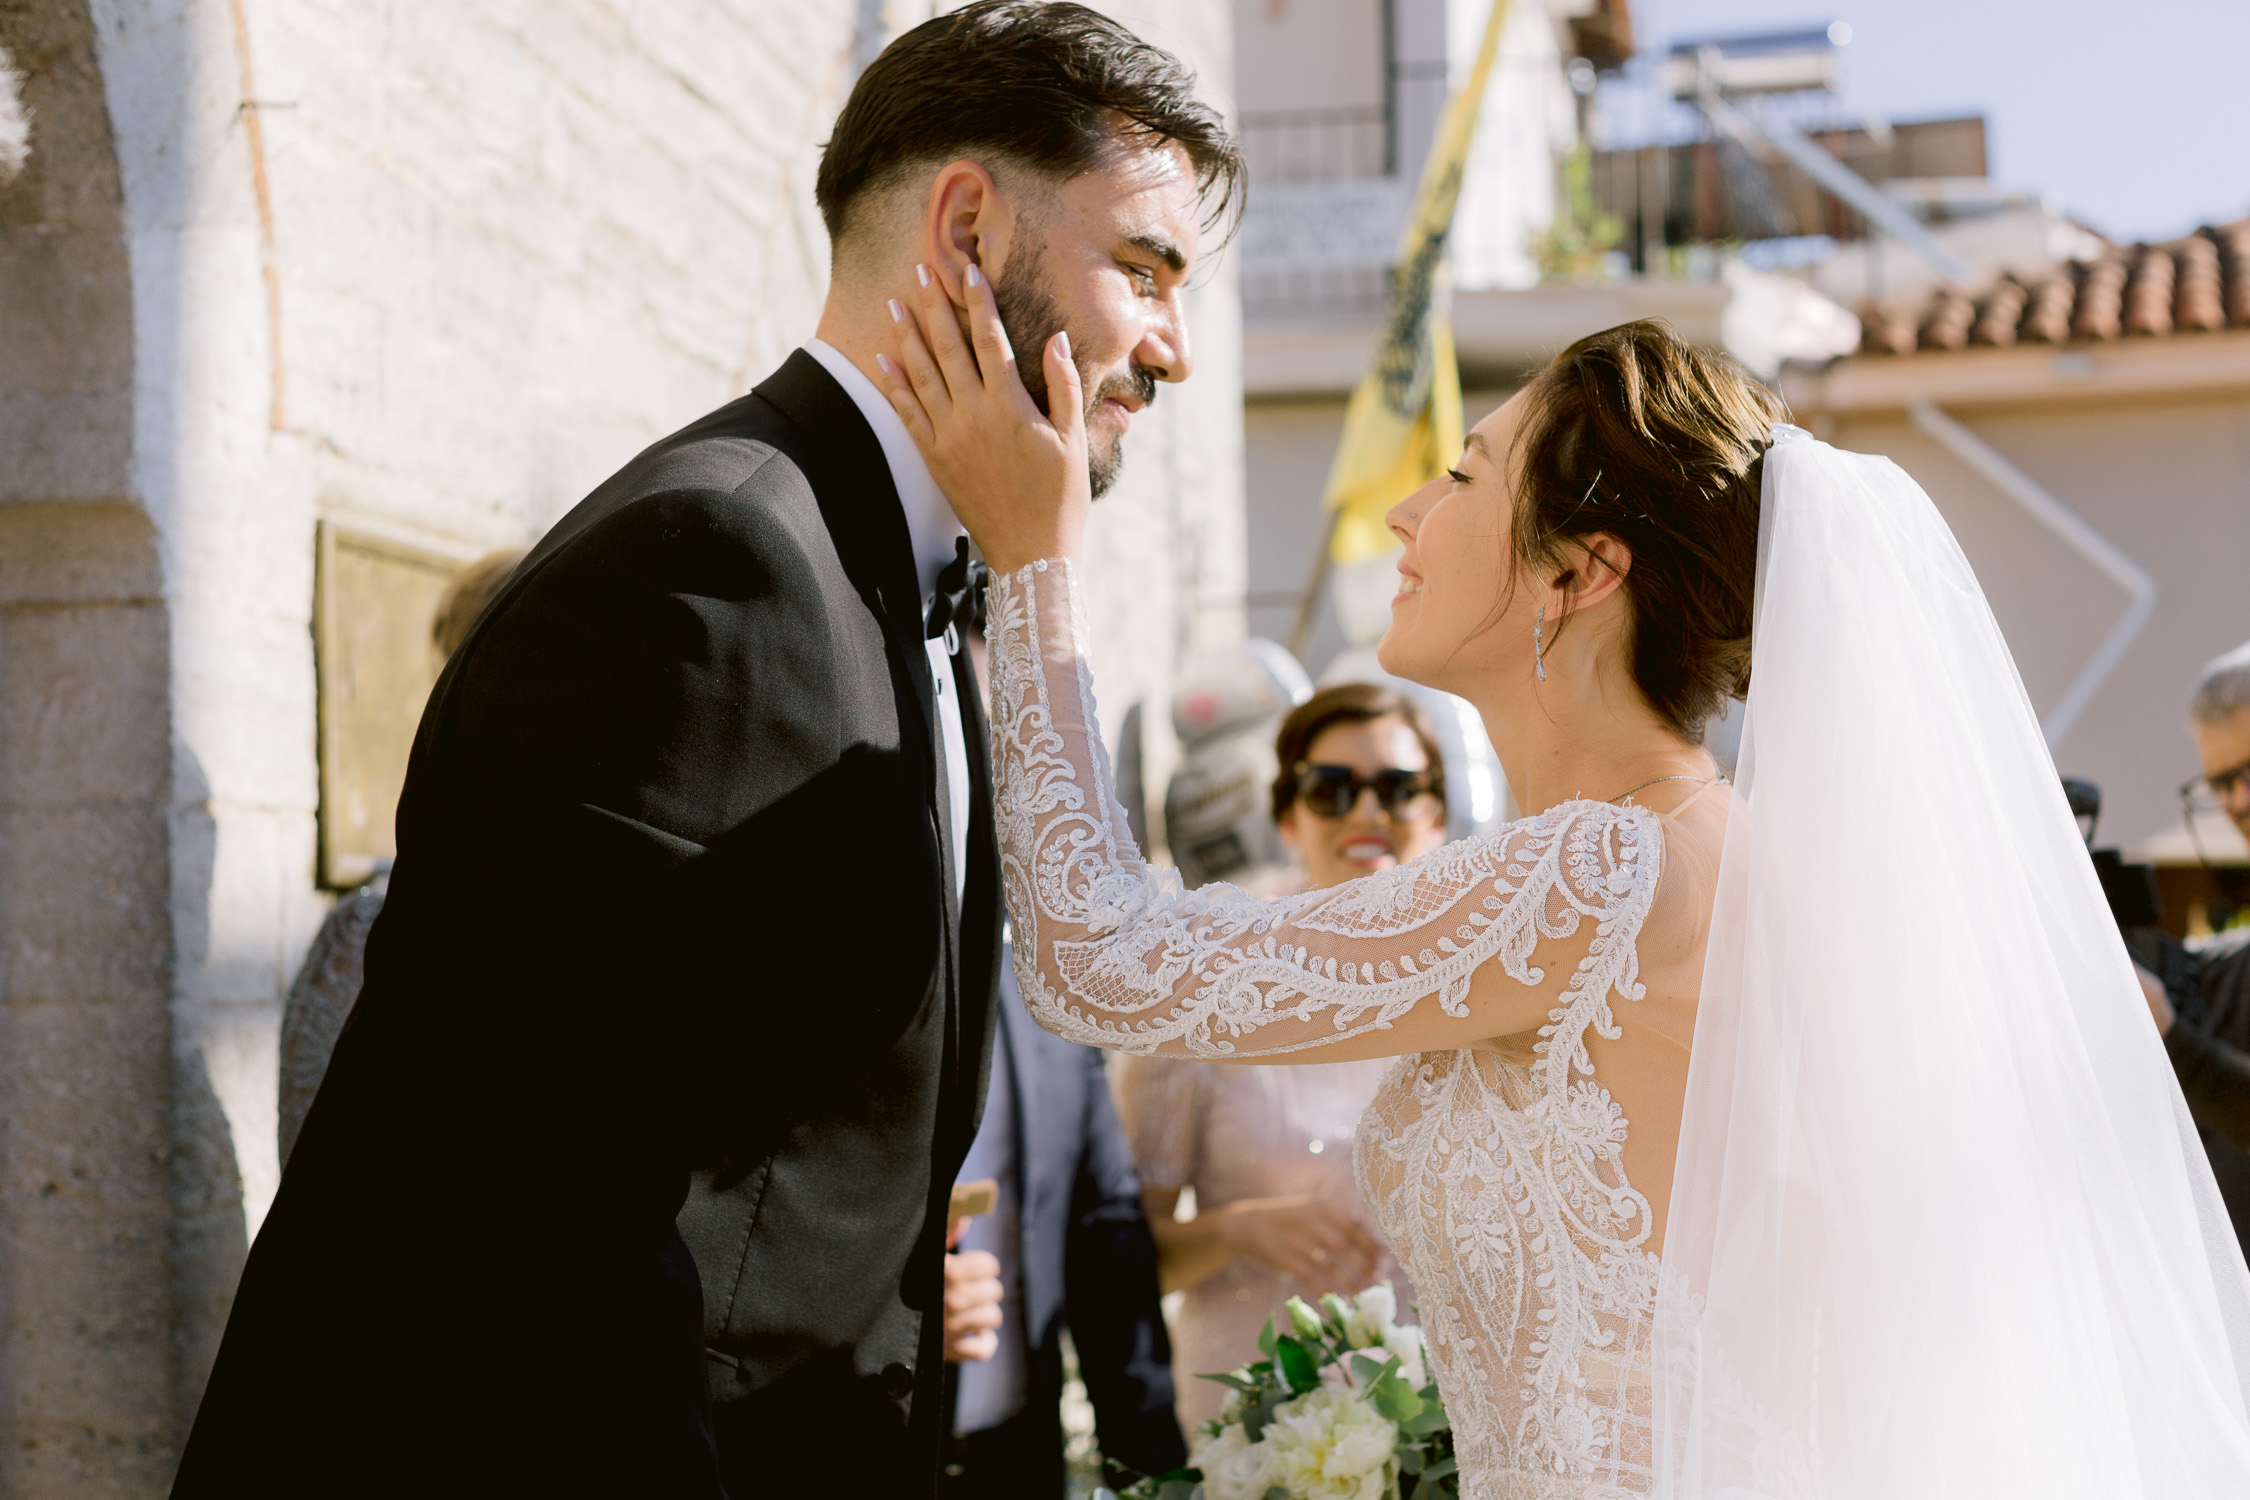 Bride and groom first kiss before wedding ceremony in Greece